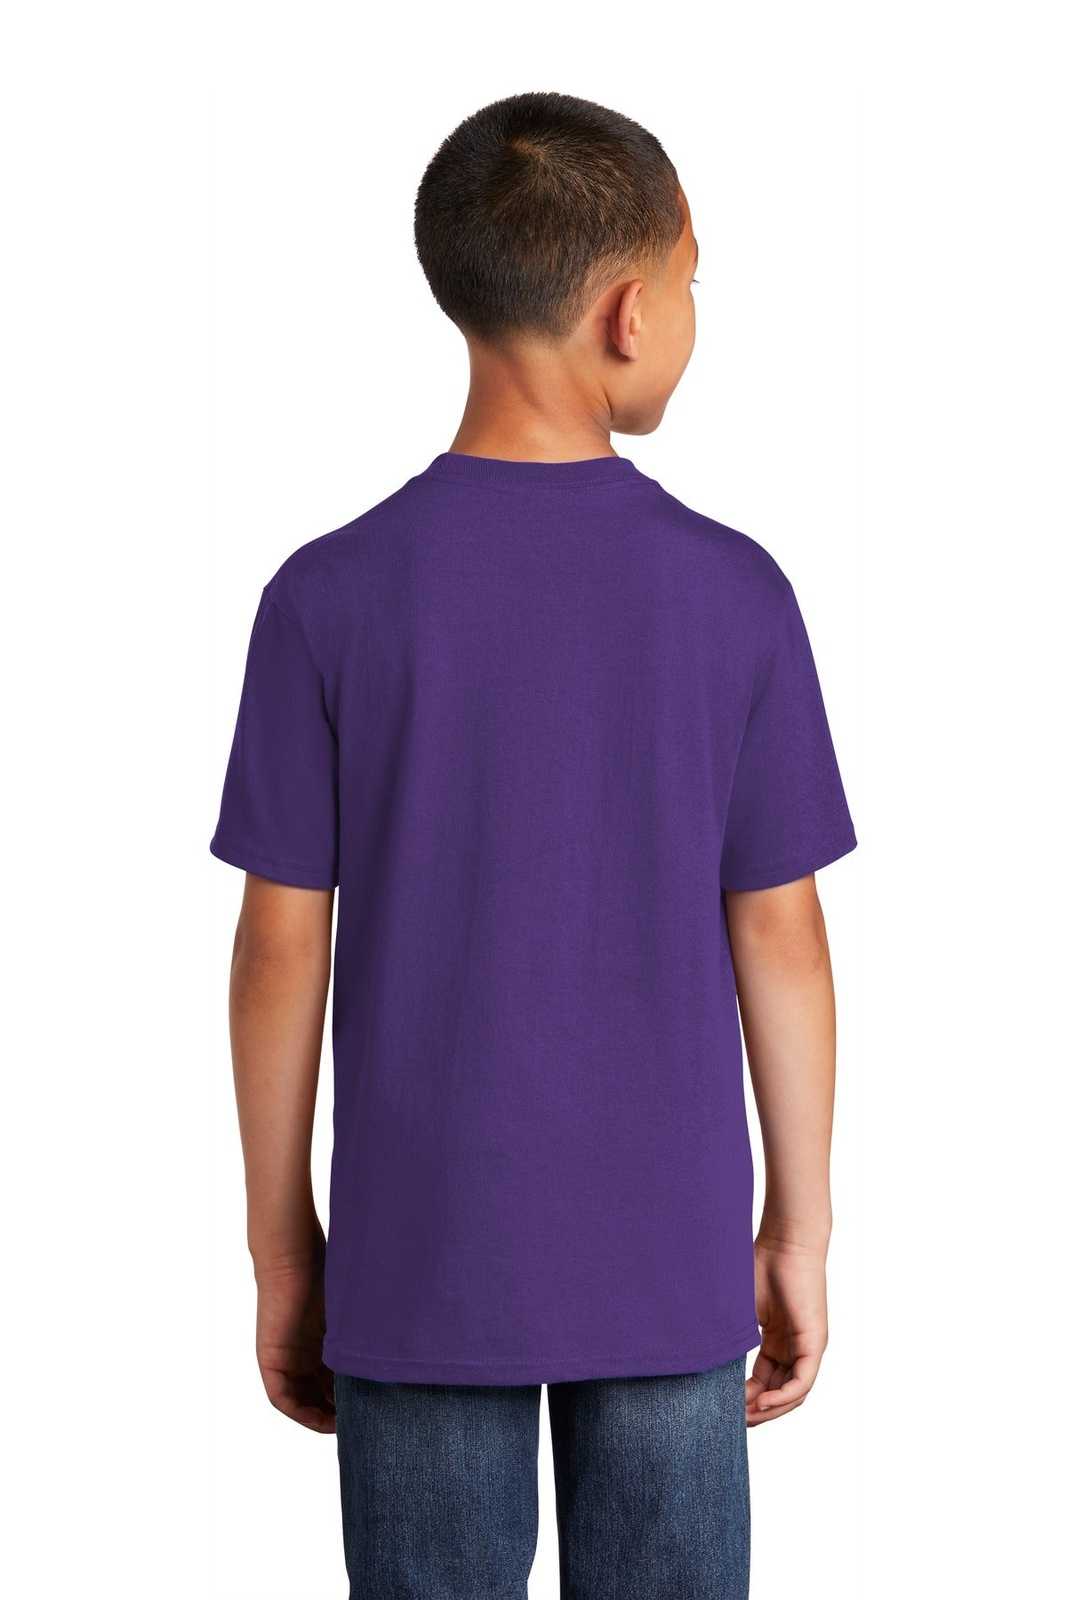 Port & Company PC54Y Youth Core Cotton Tee - Team Purple - HIT a Double - 1